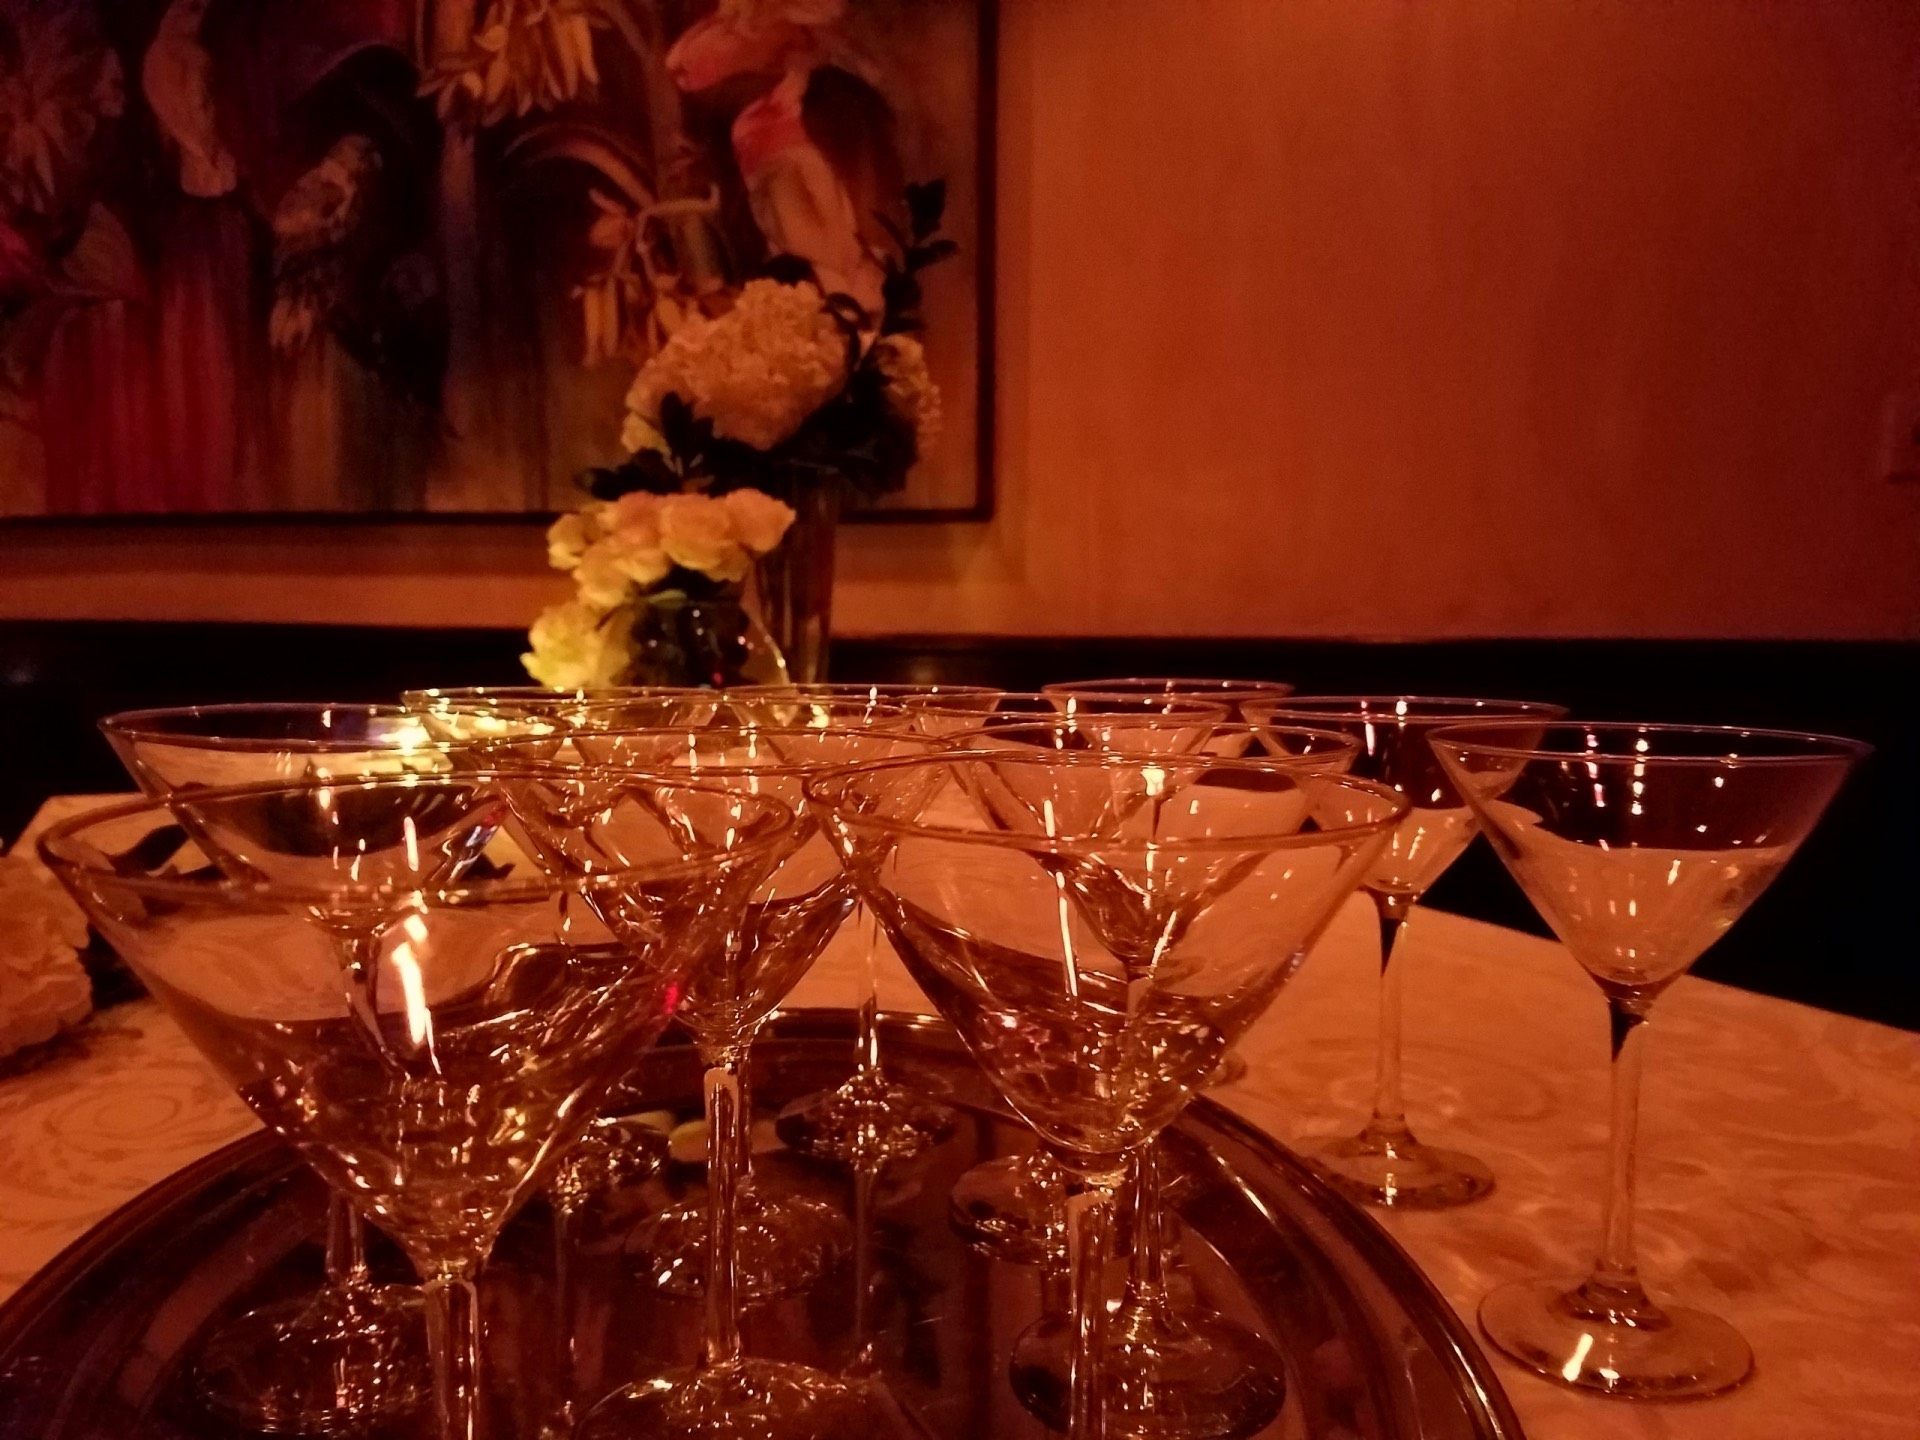 Martini bar at private dining event